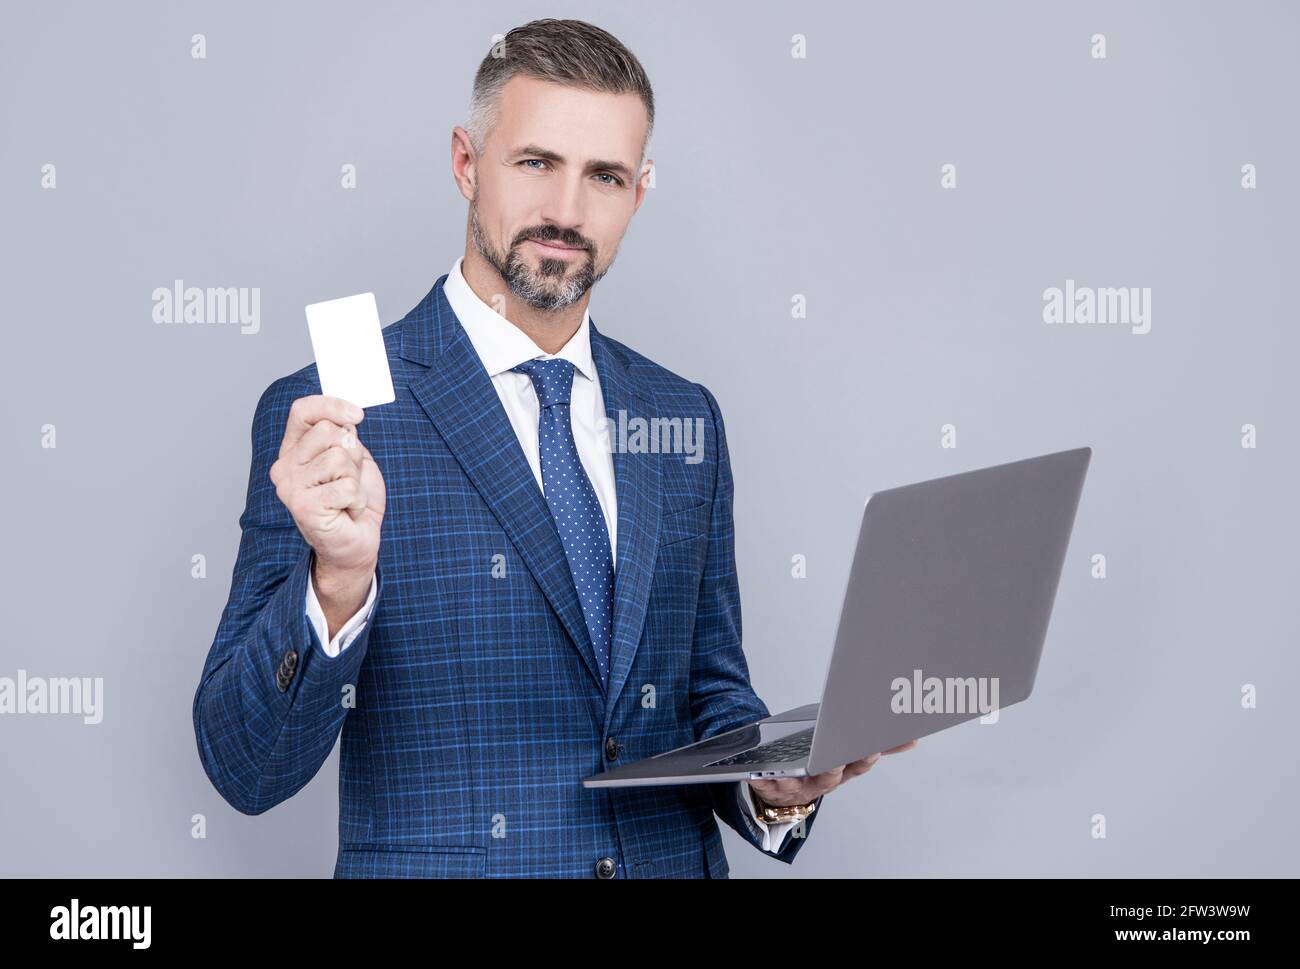 confident businessman man in businesslike suit hold laptop and debit card, shopping online Stock Photo